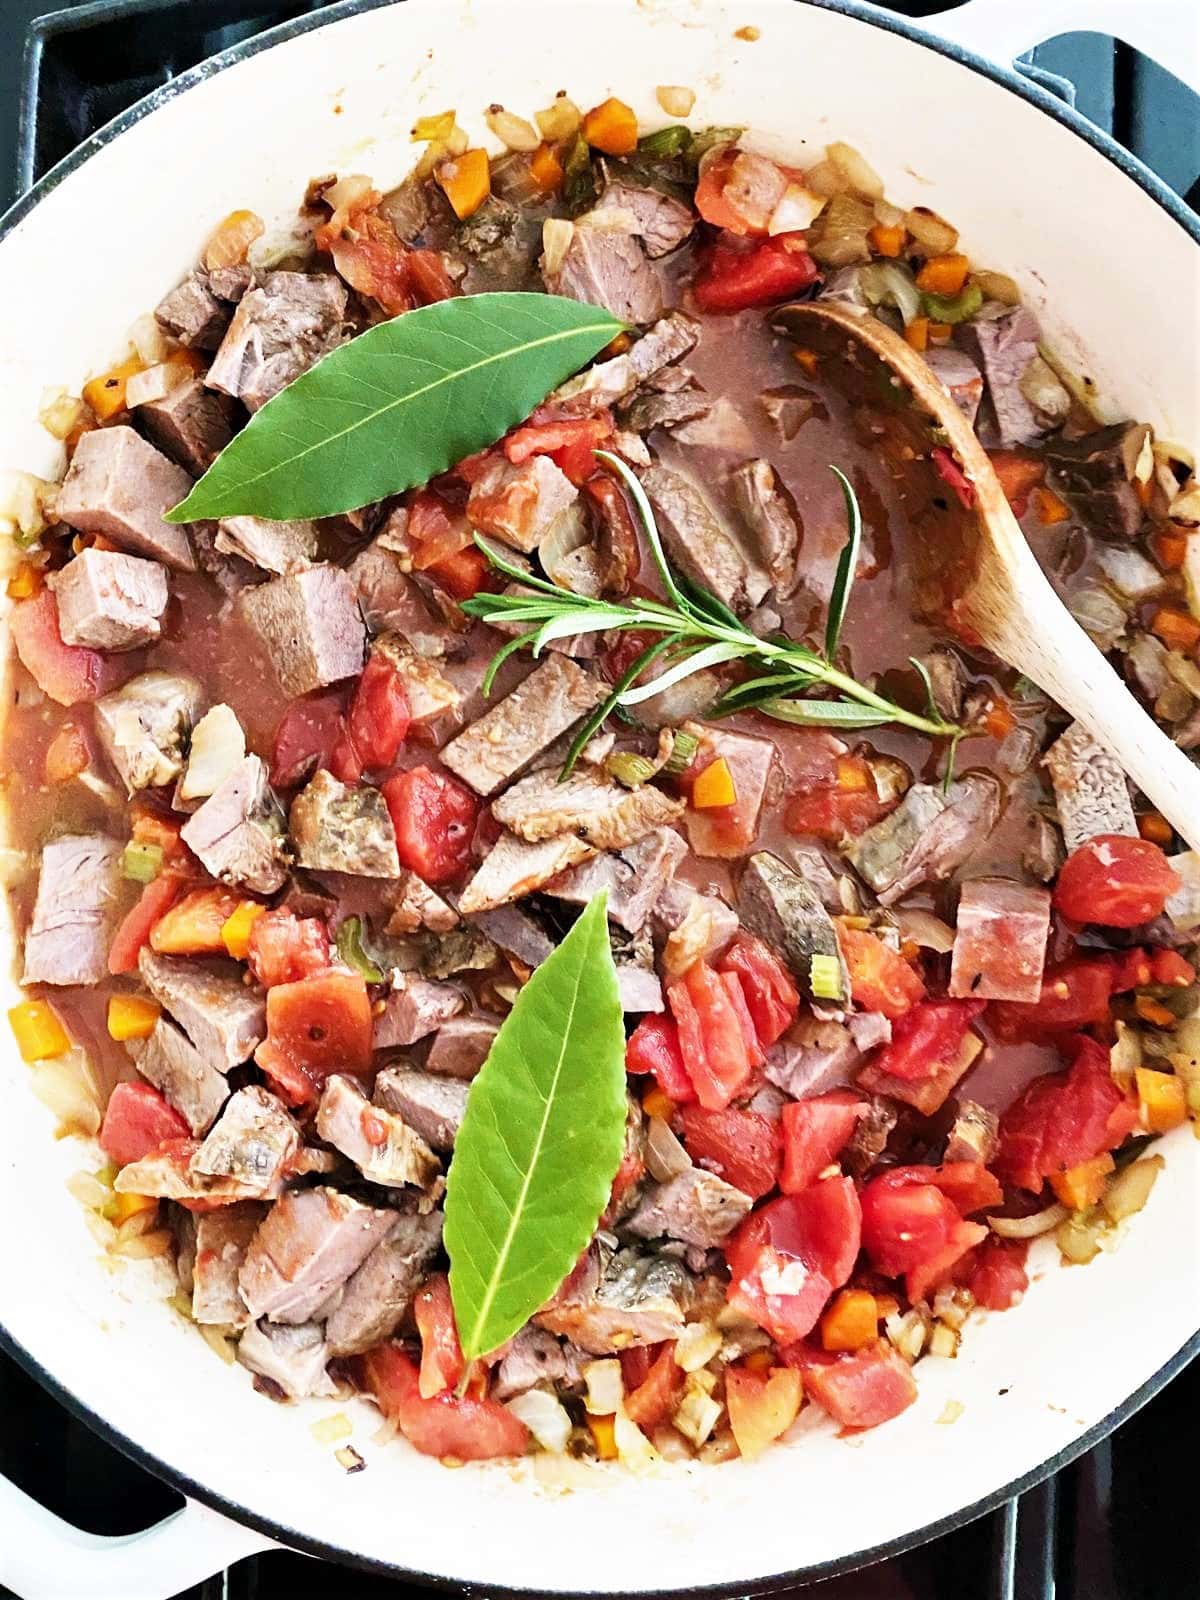 Top down image of large pot with part cooked lamb ragu topped with a sprig of fresh rosemary and two fresh bay leaves.